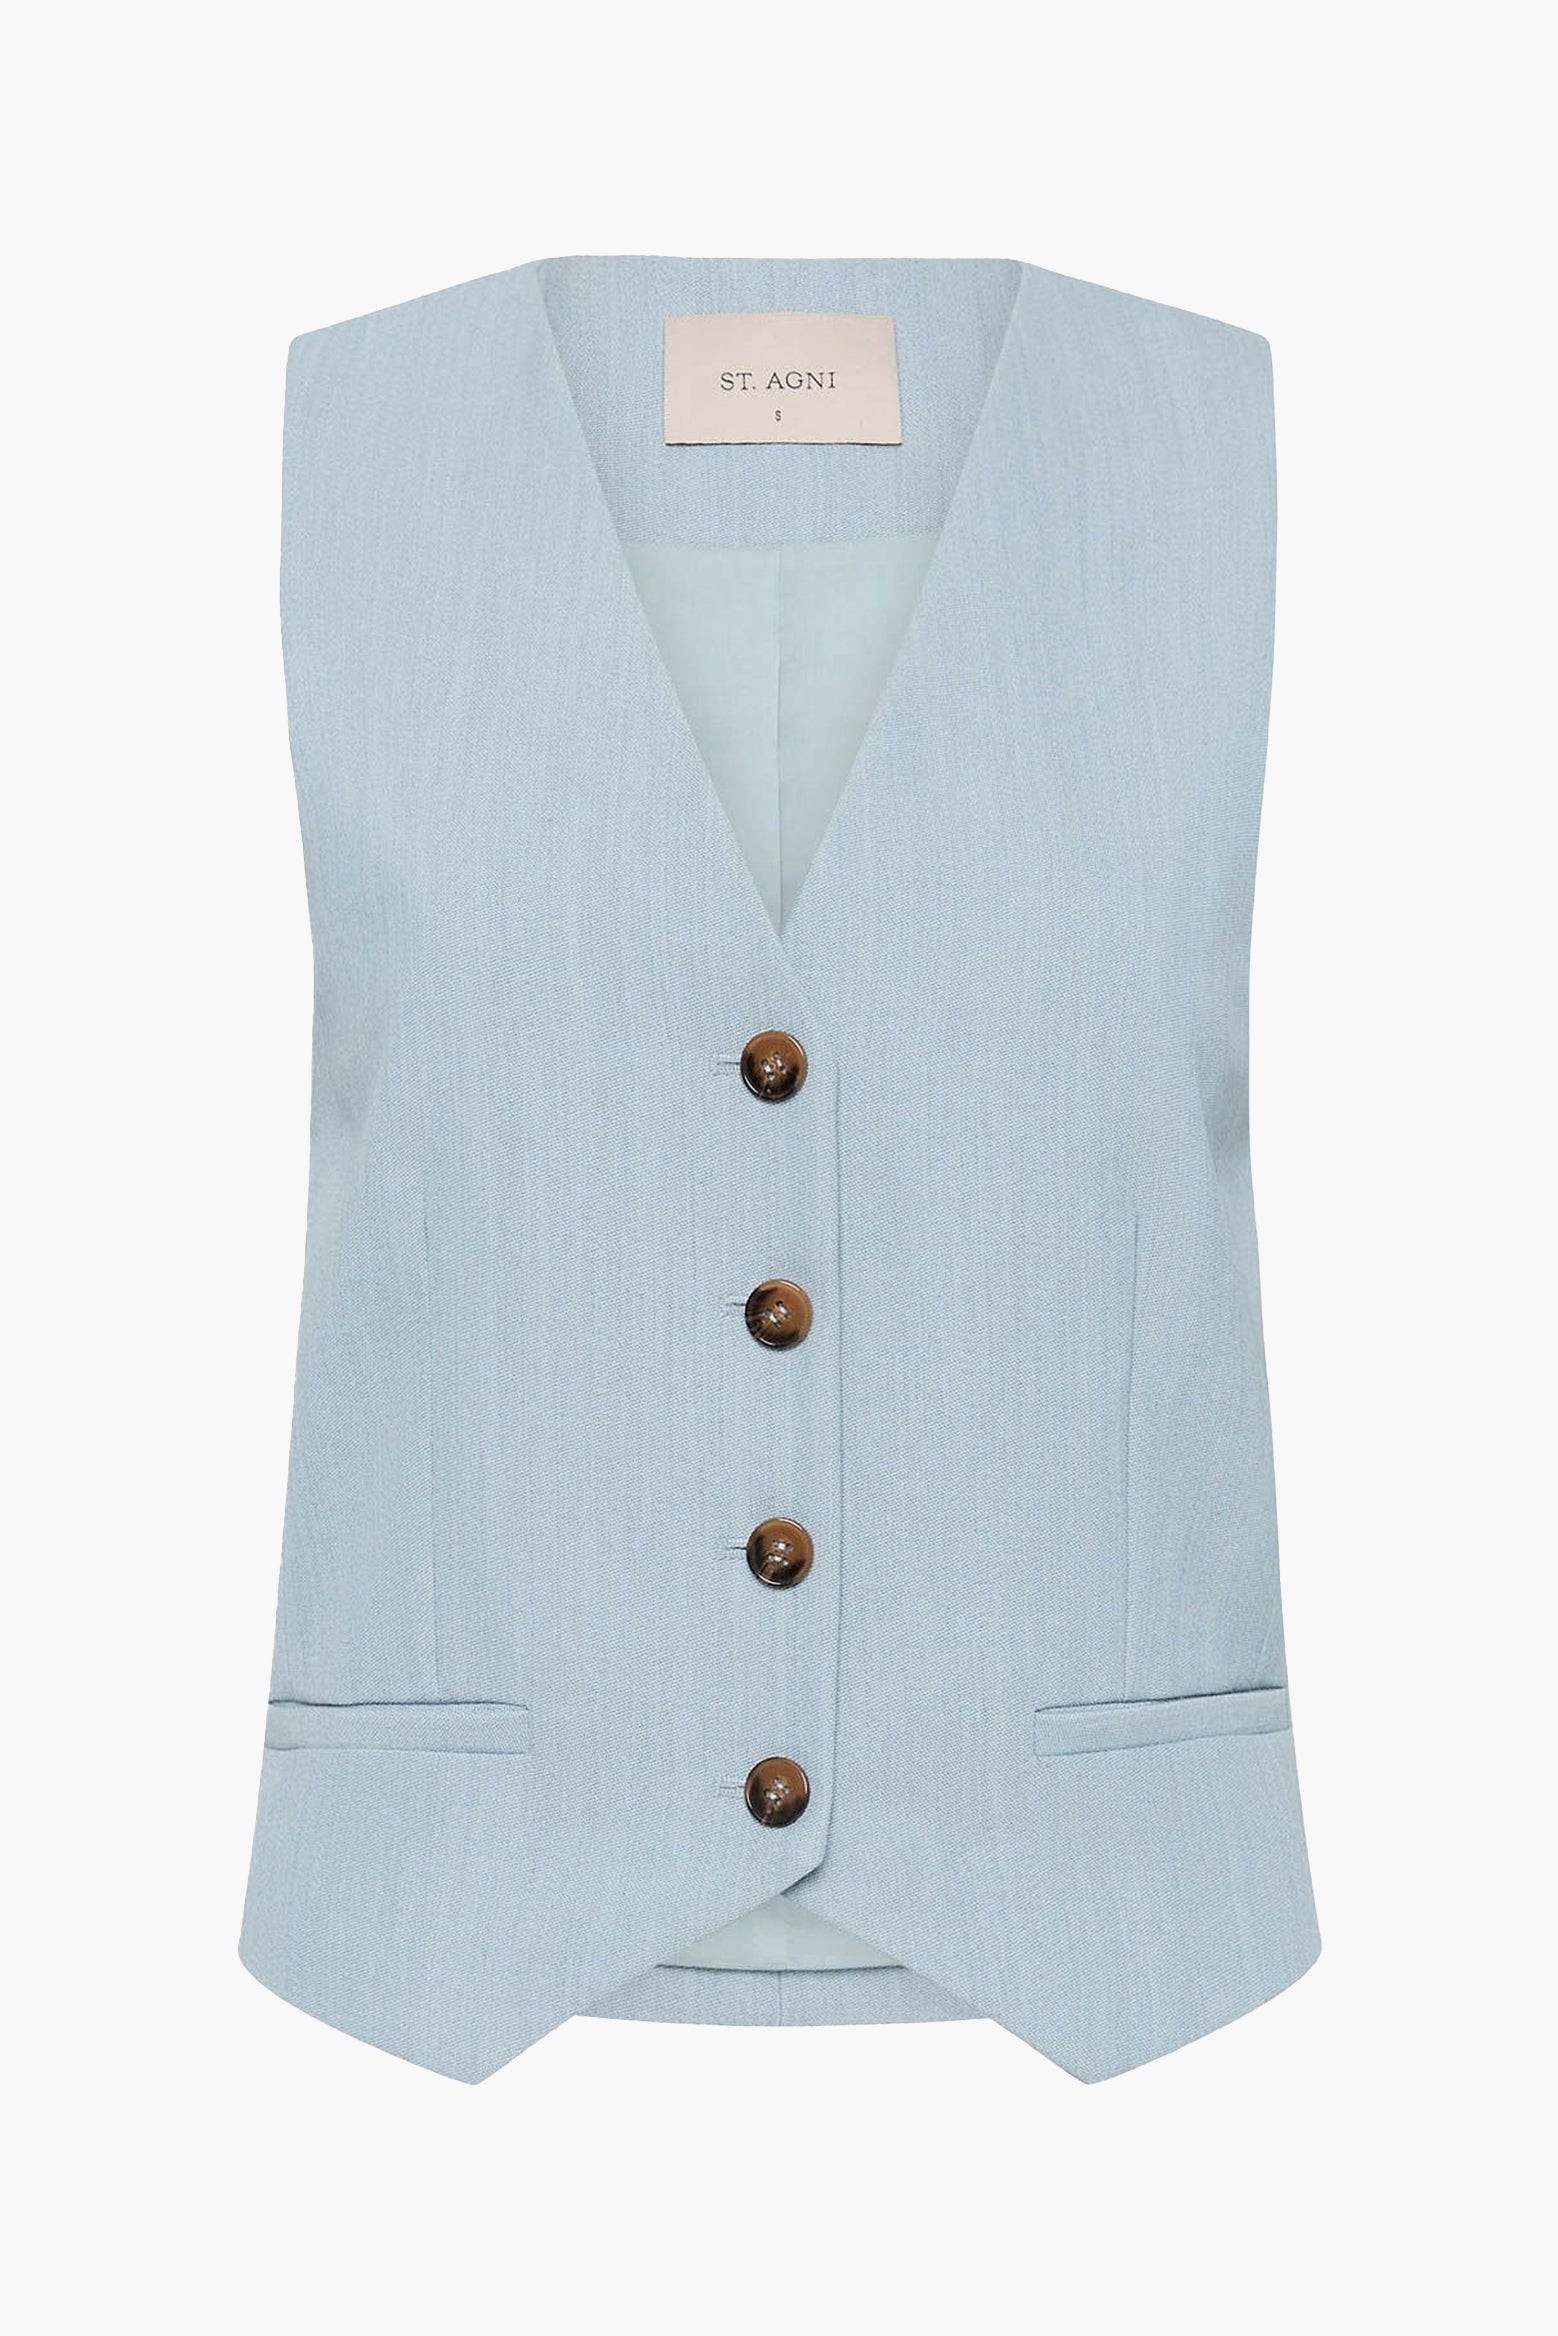 The ST. AGNI Carter Vest in Stone Blue from The New Trend.